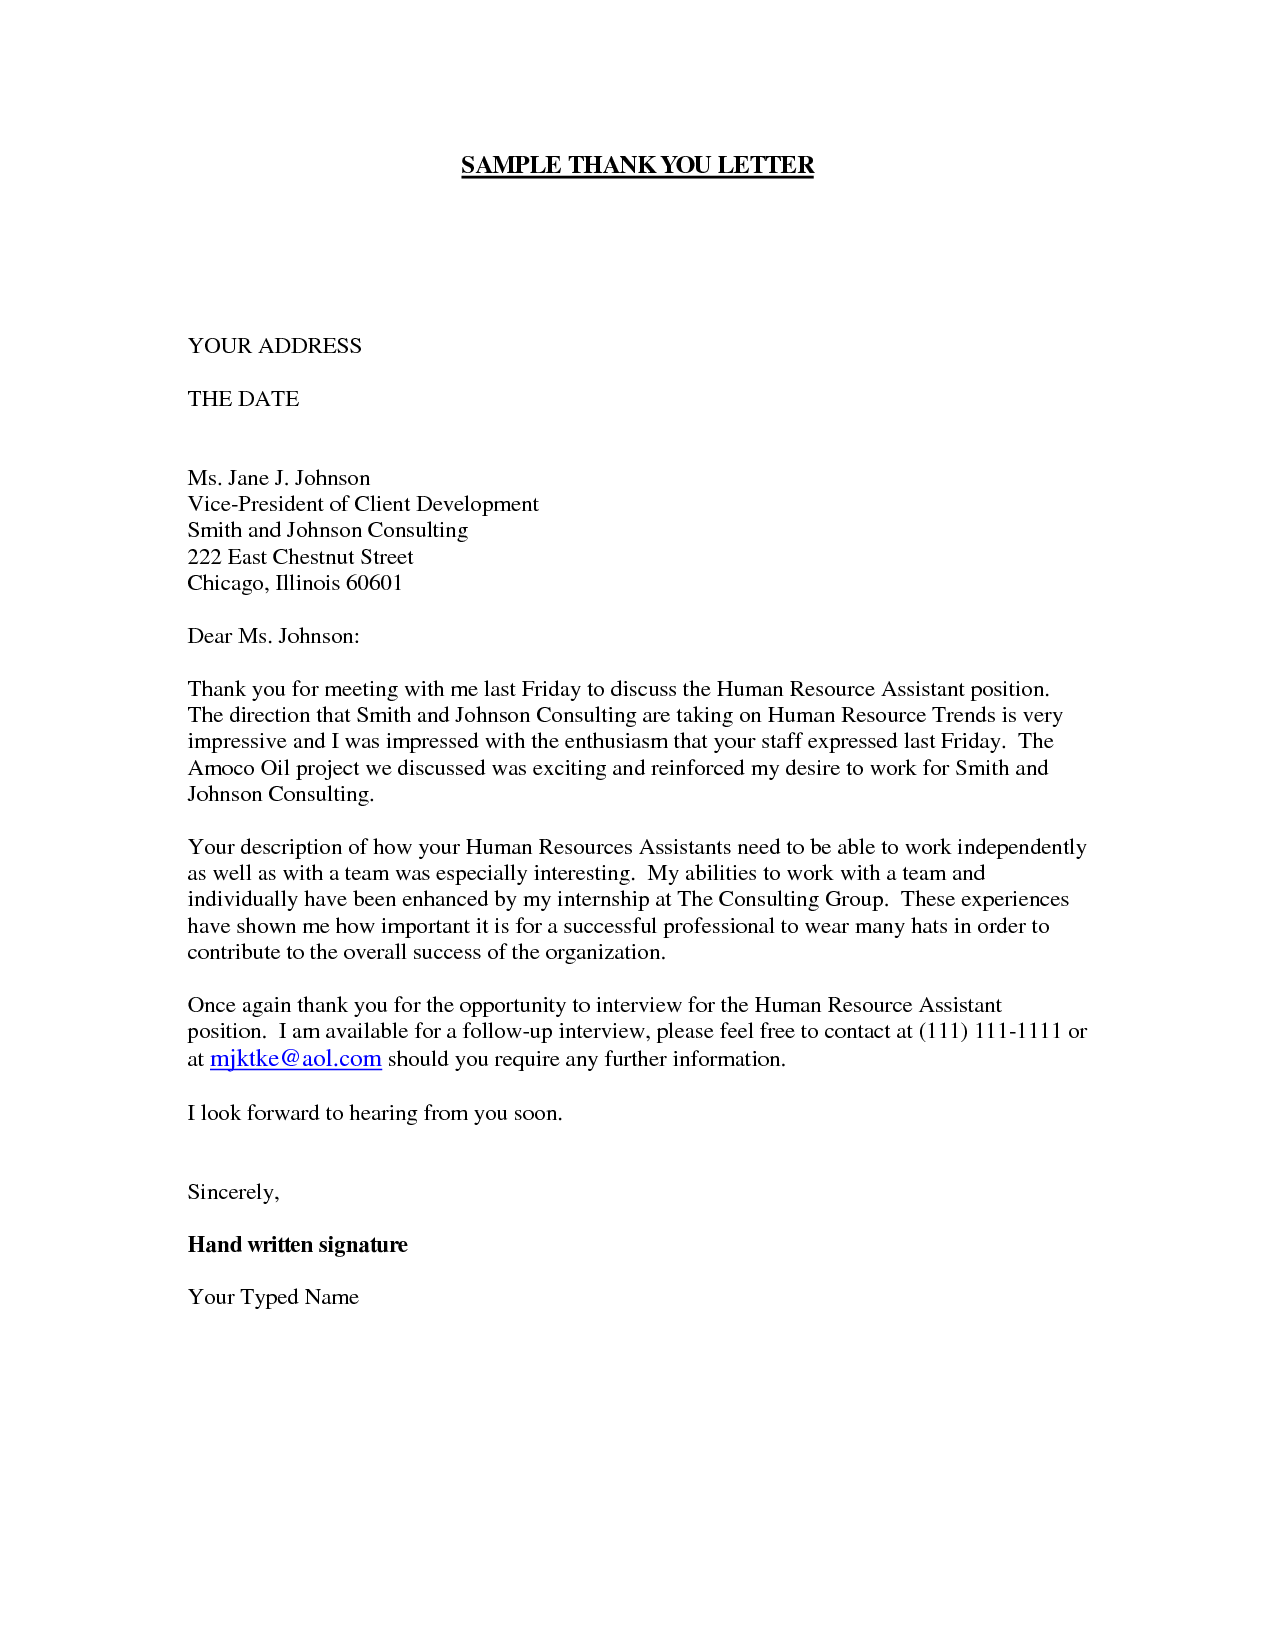 Personal Thank You Letter | Crna Cover Letter